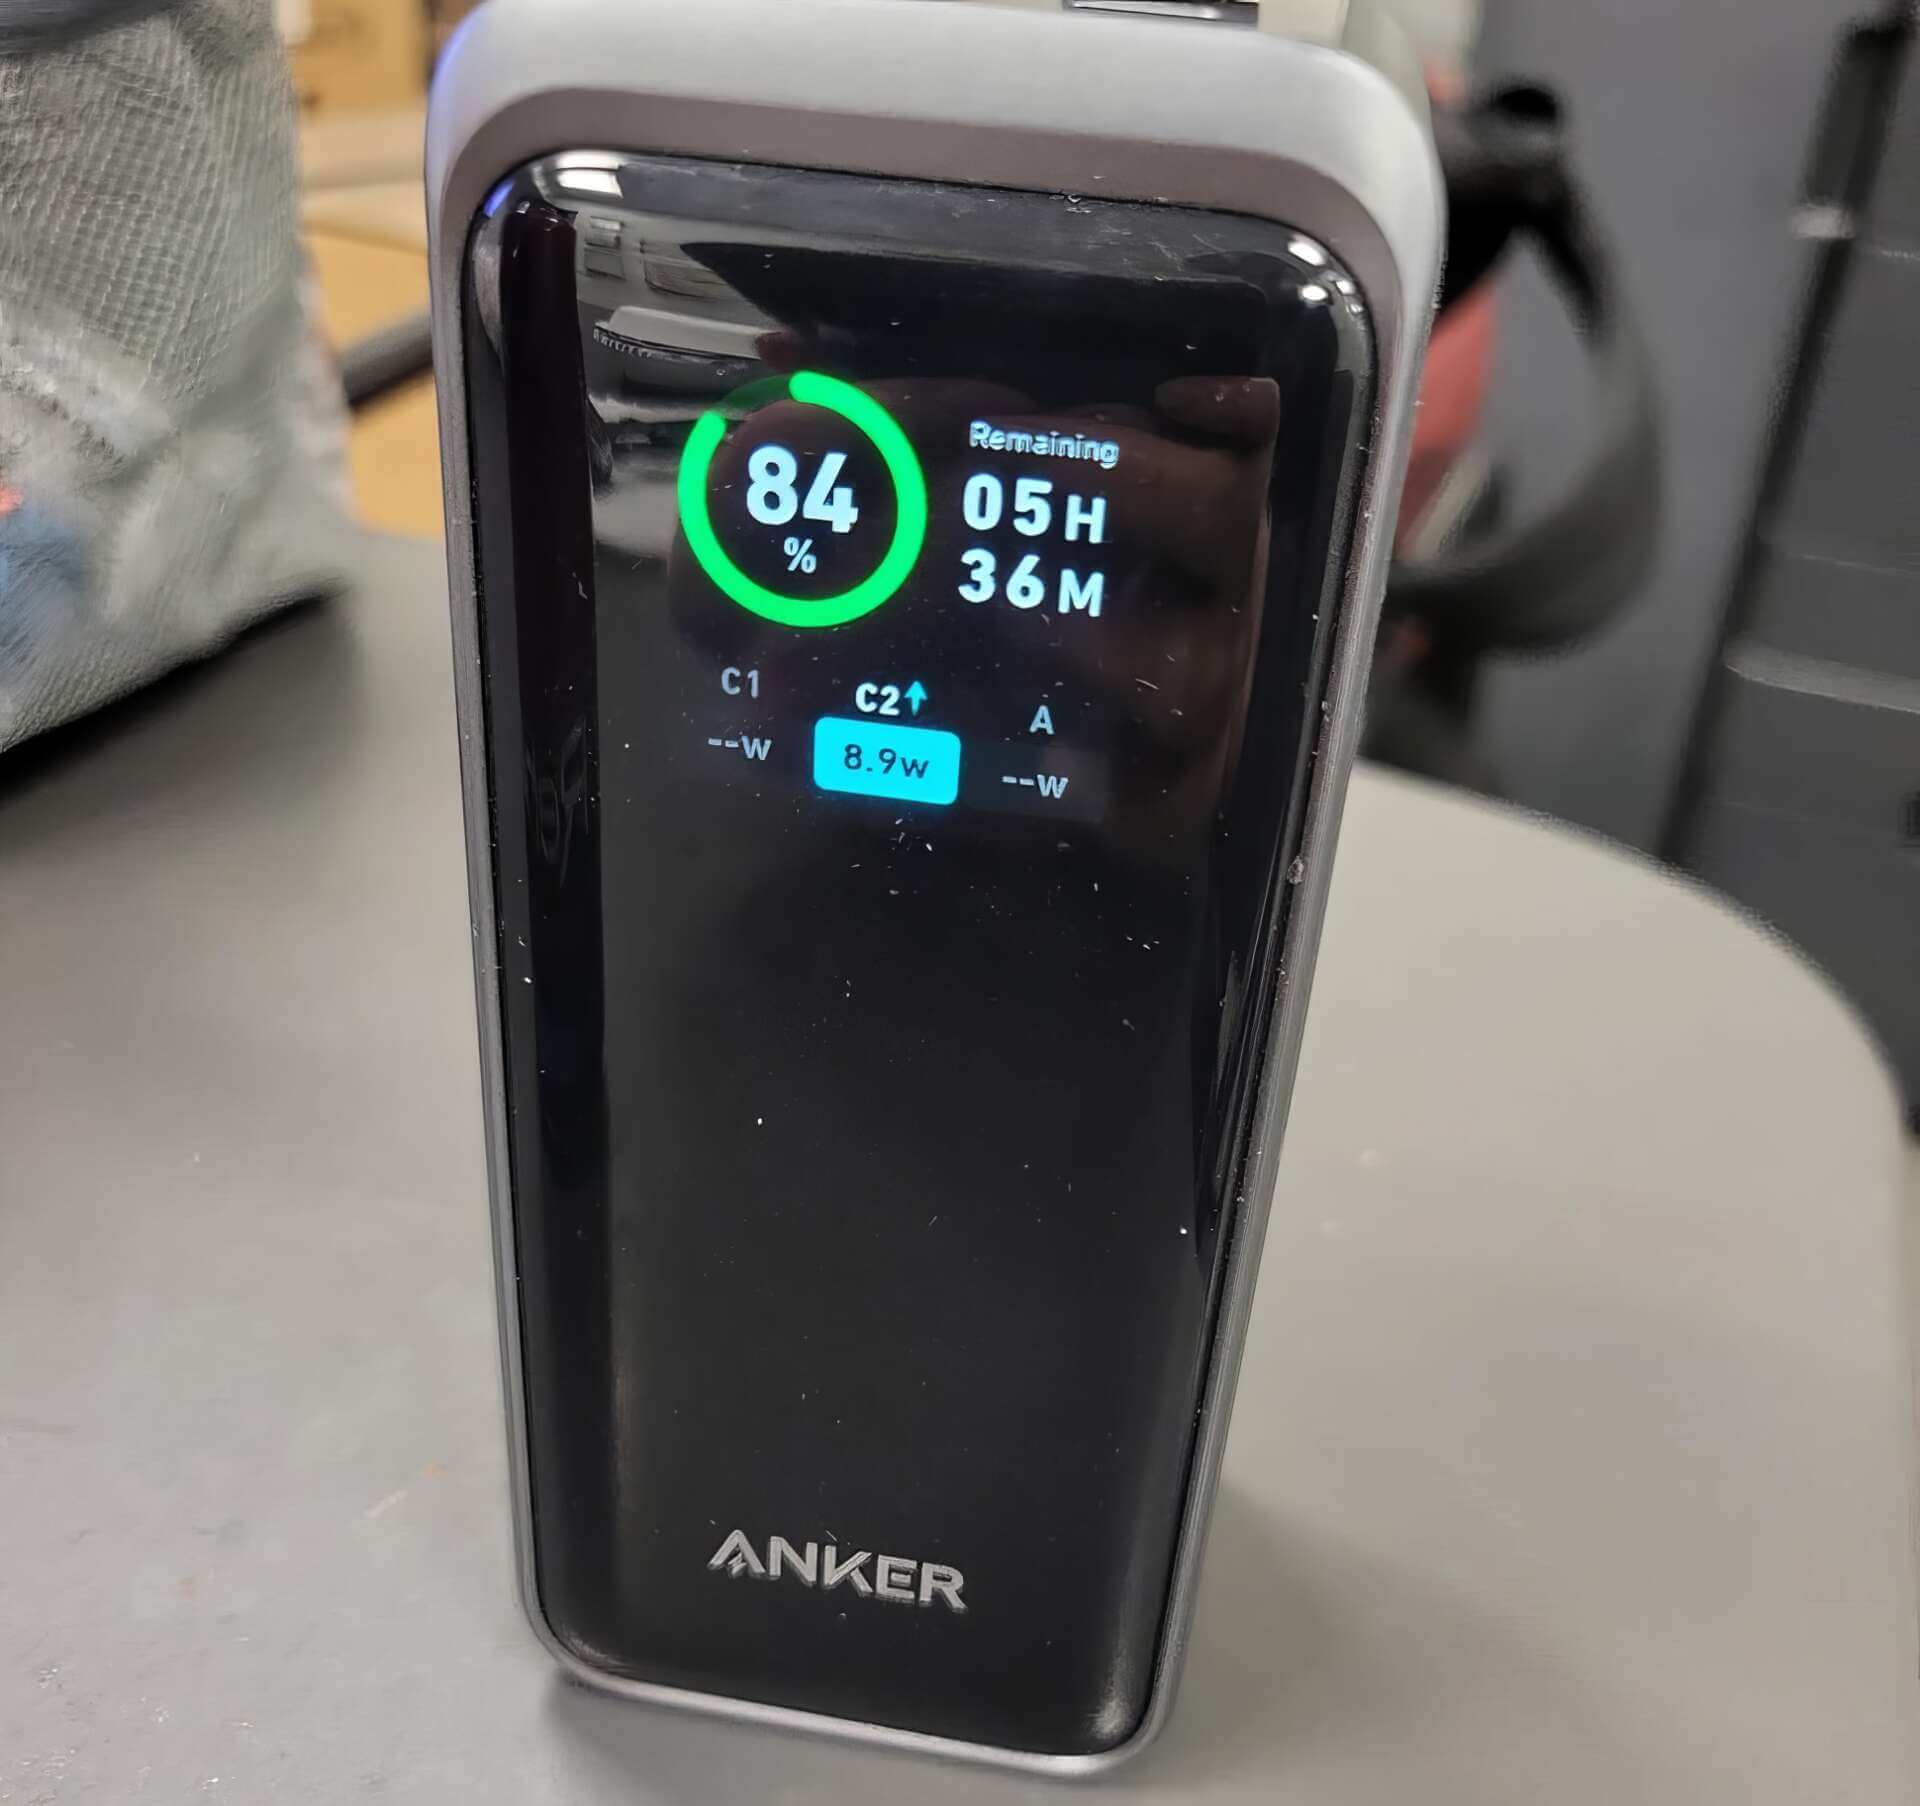 Anker Prime Power Bank Charging Time